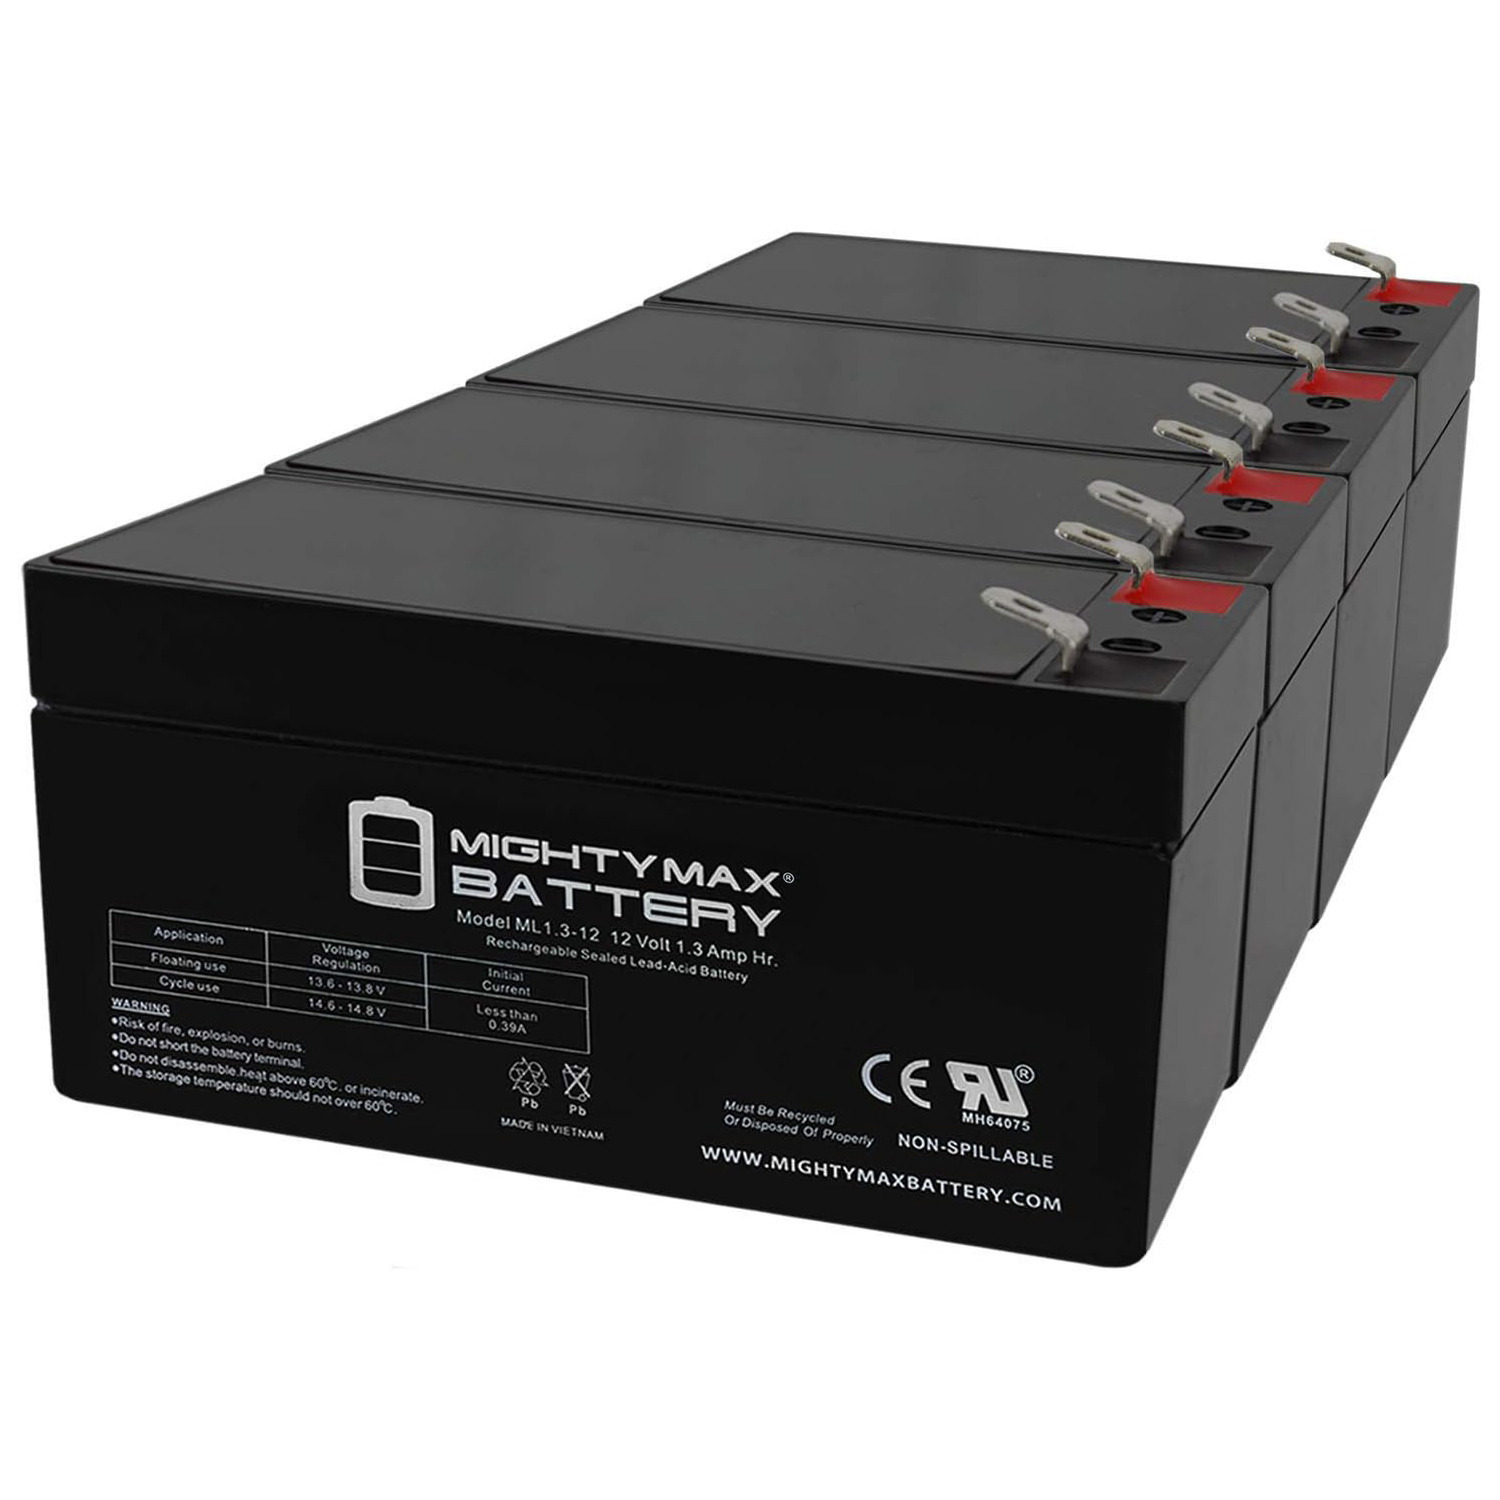 12V 1.3Ah Replacement Battery for Wangpin 6FM1.3 - 4 Pack